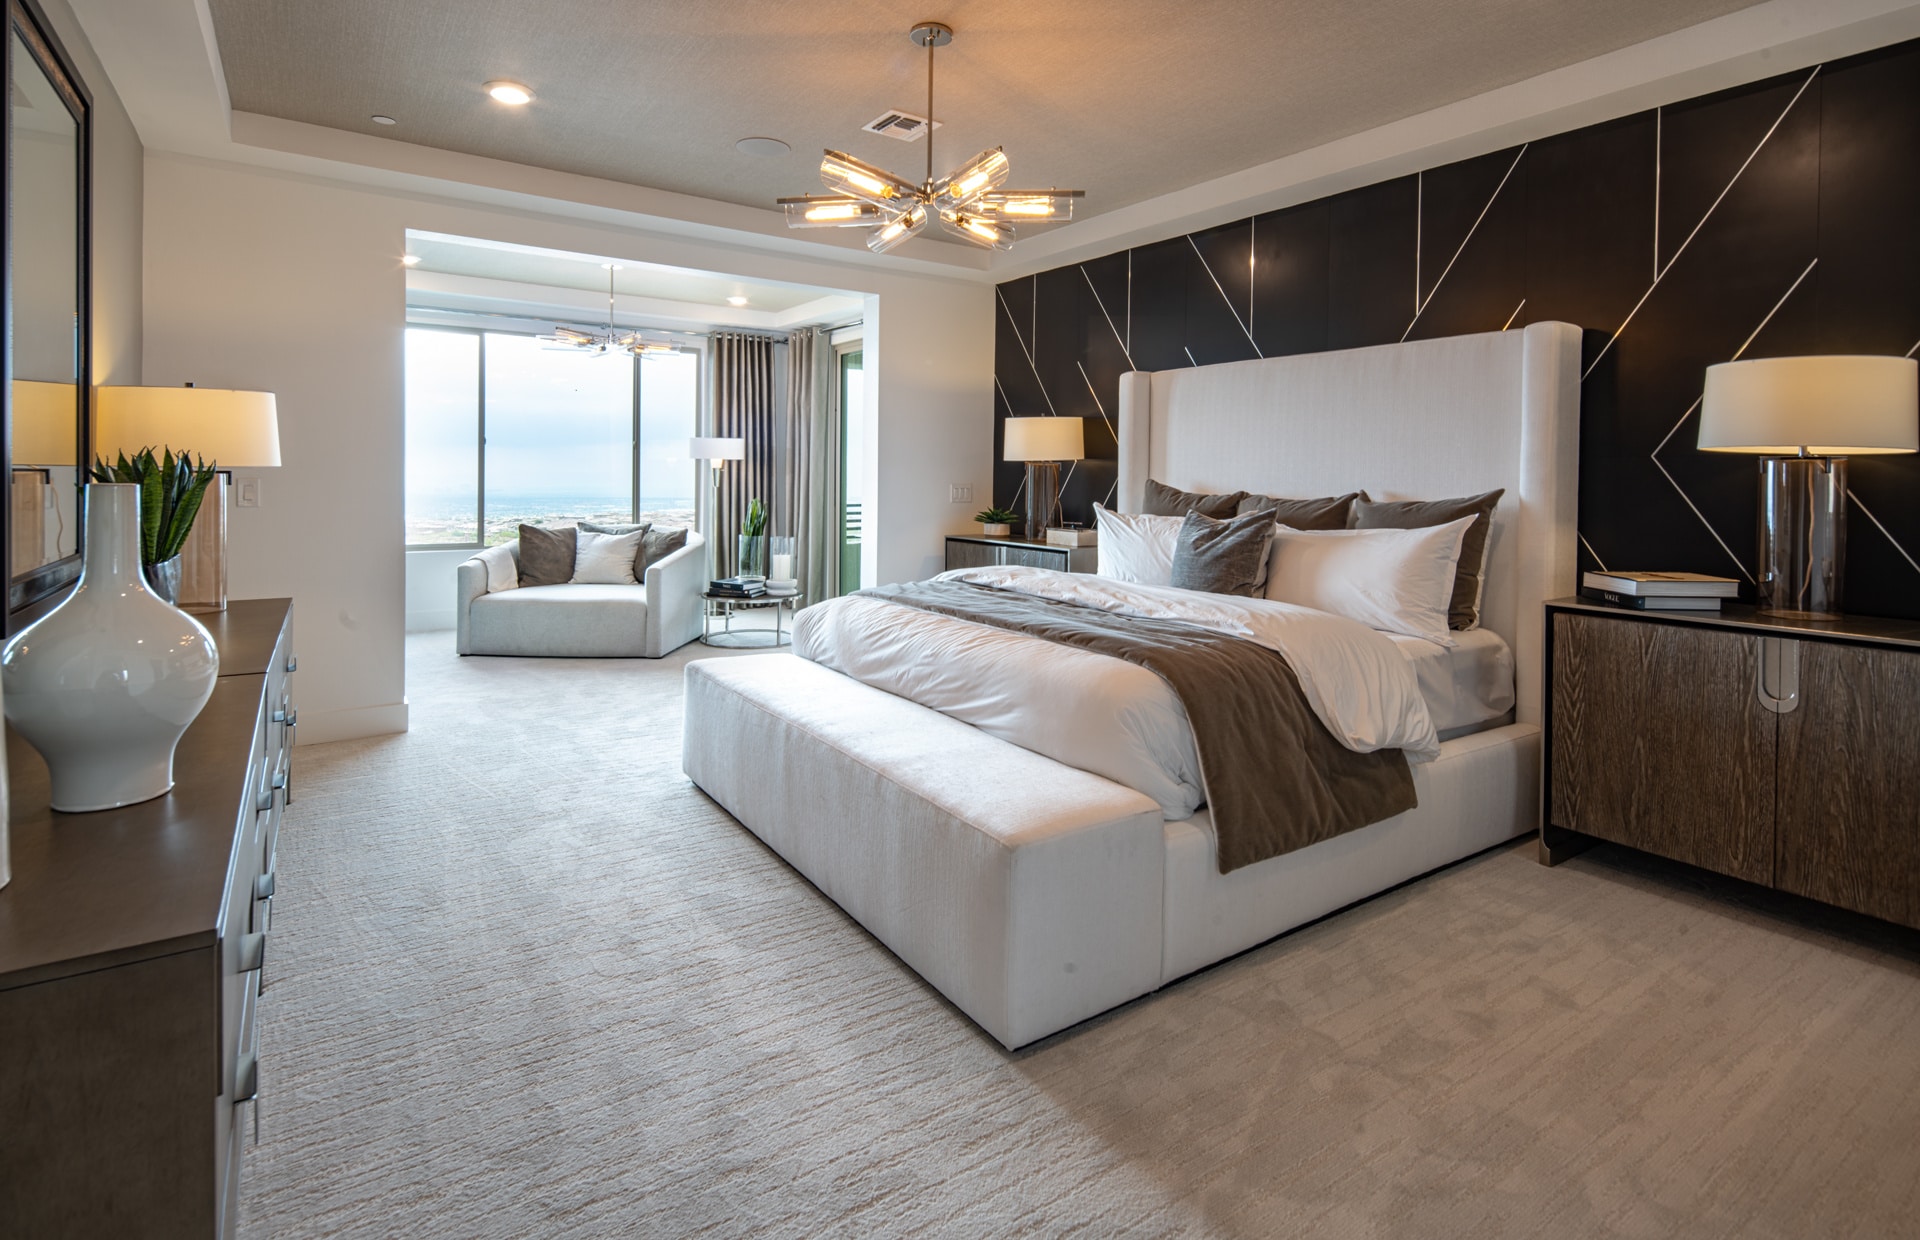 Primary Bedroom of Pesaro Model at Carmel Cliff by Pulte Homes